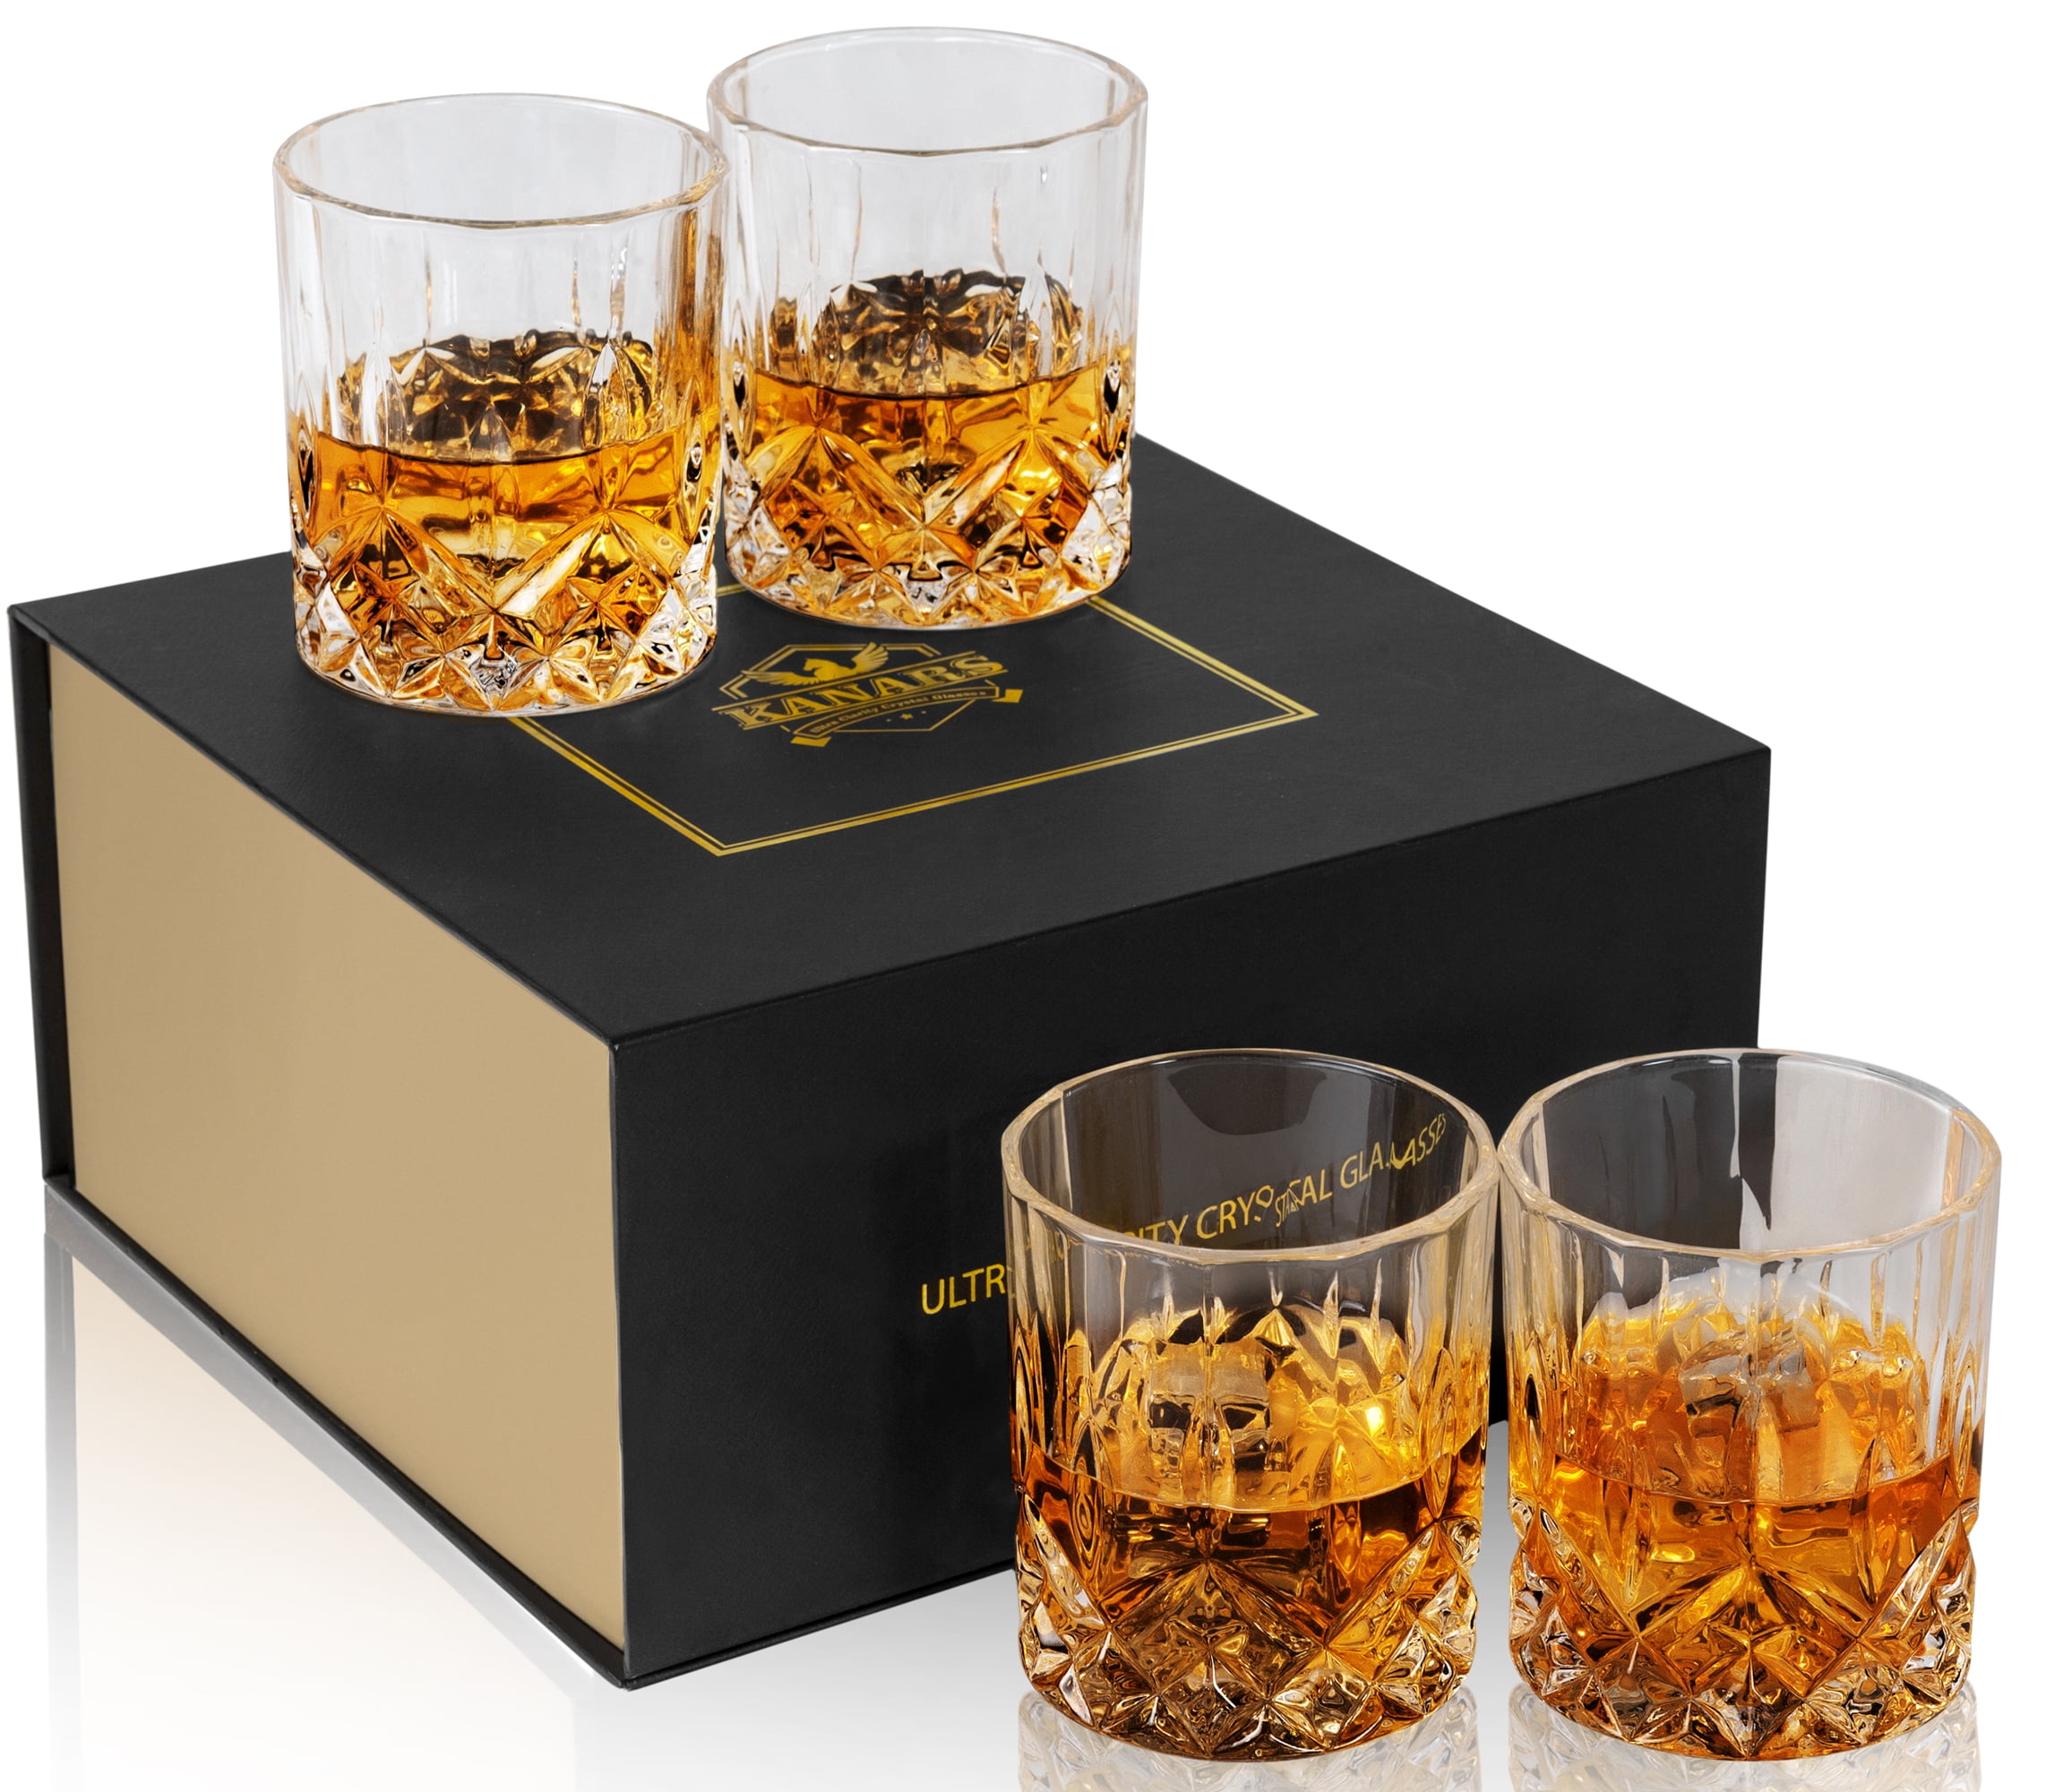 Lead Free Crystal Scotch Tumbler Set of 2 Unique Gift Box for Men/Dad/Husband/Friends LANFULA Double Old Fashioned Whiskey Glass 10 Oz